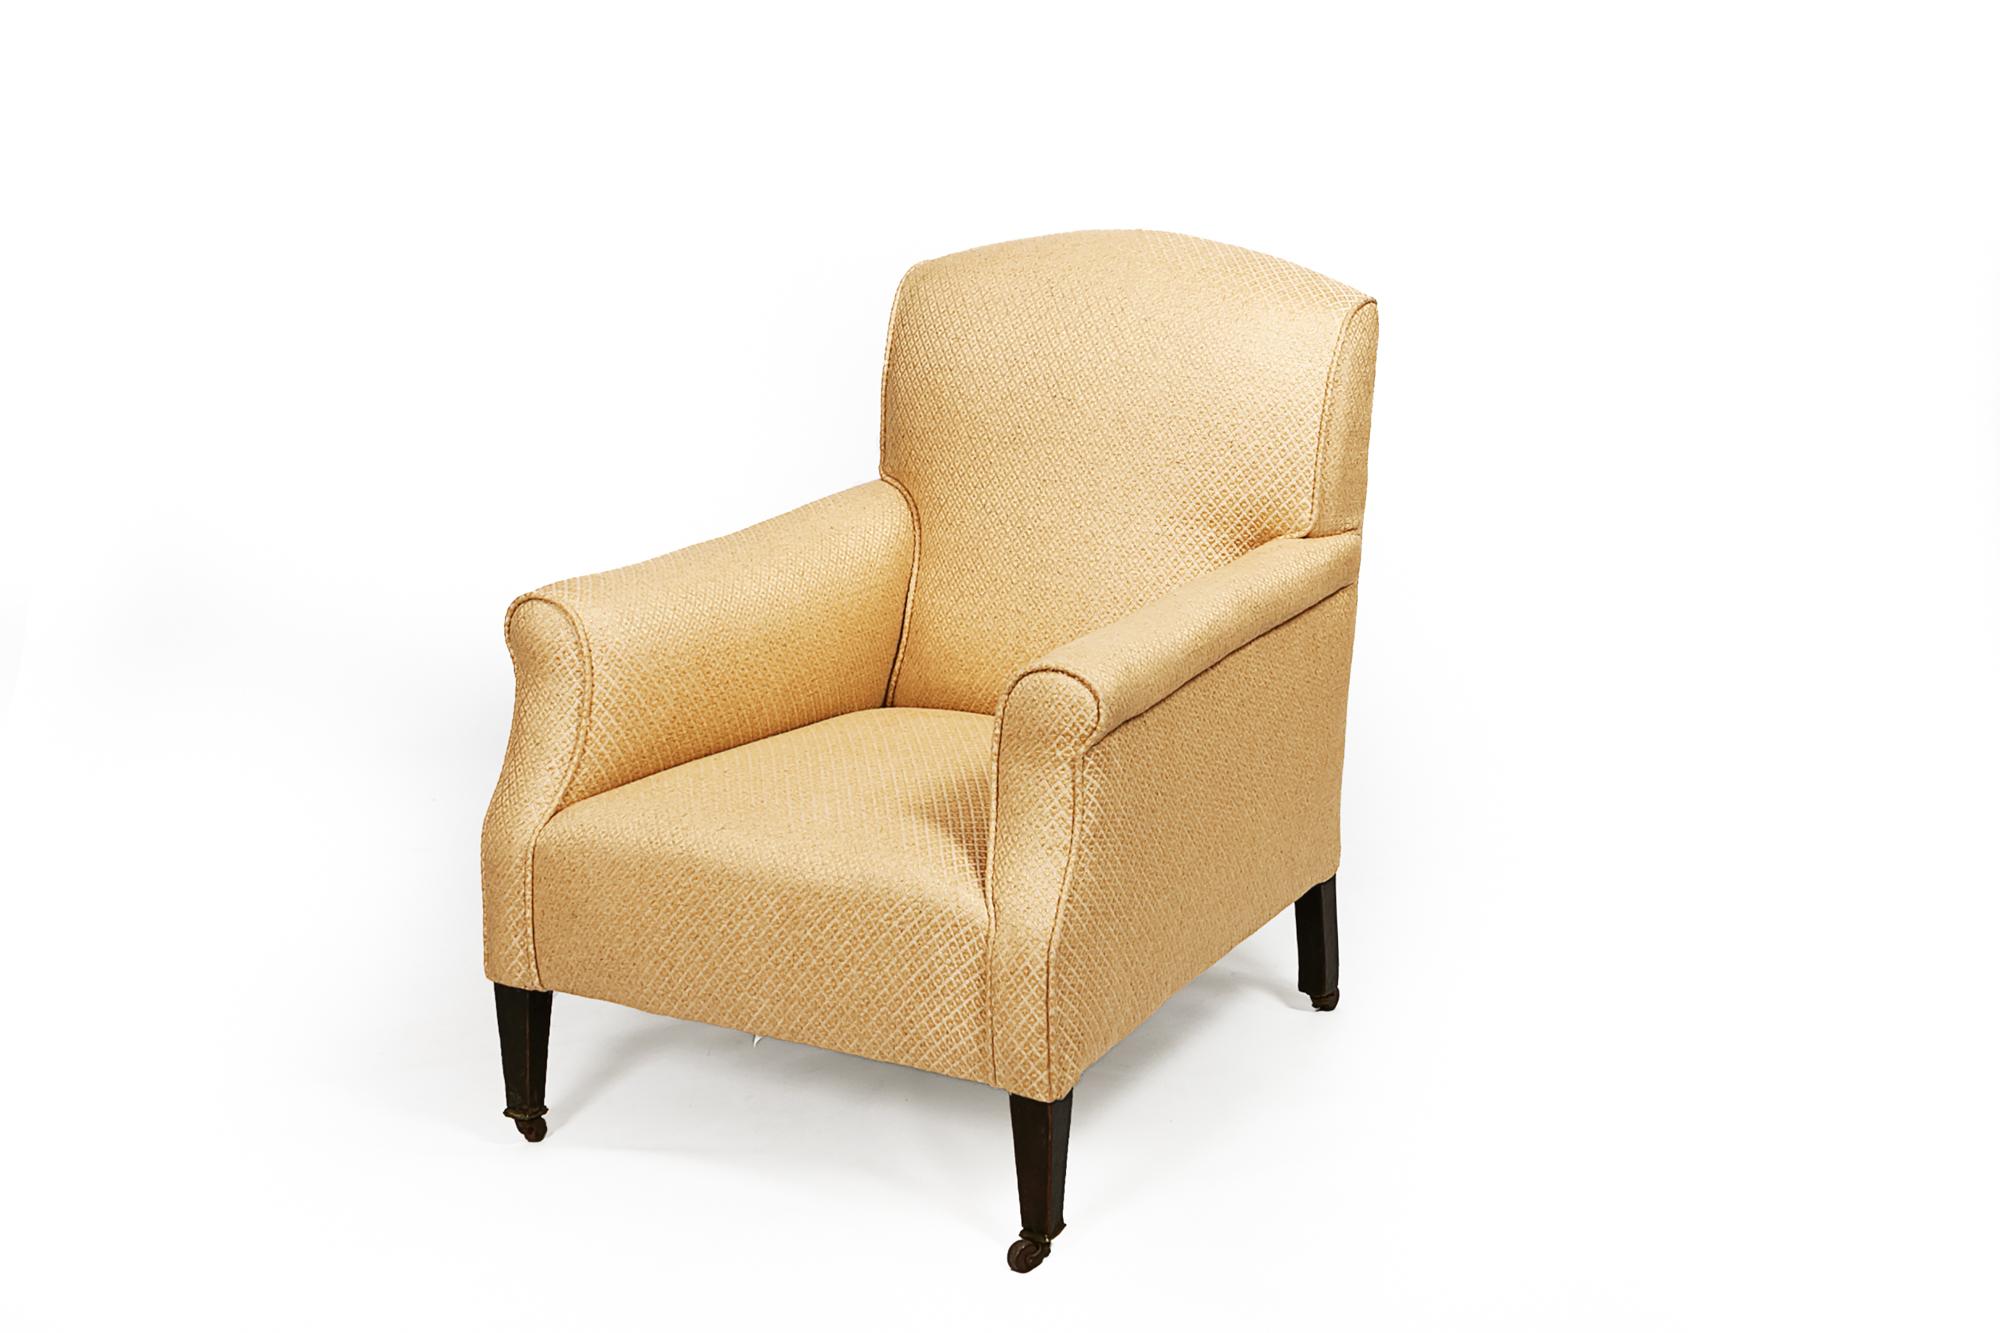 Late 19th century occasional club armchair, fully upholstered on tapered legs.